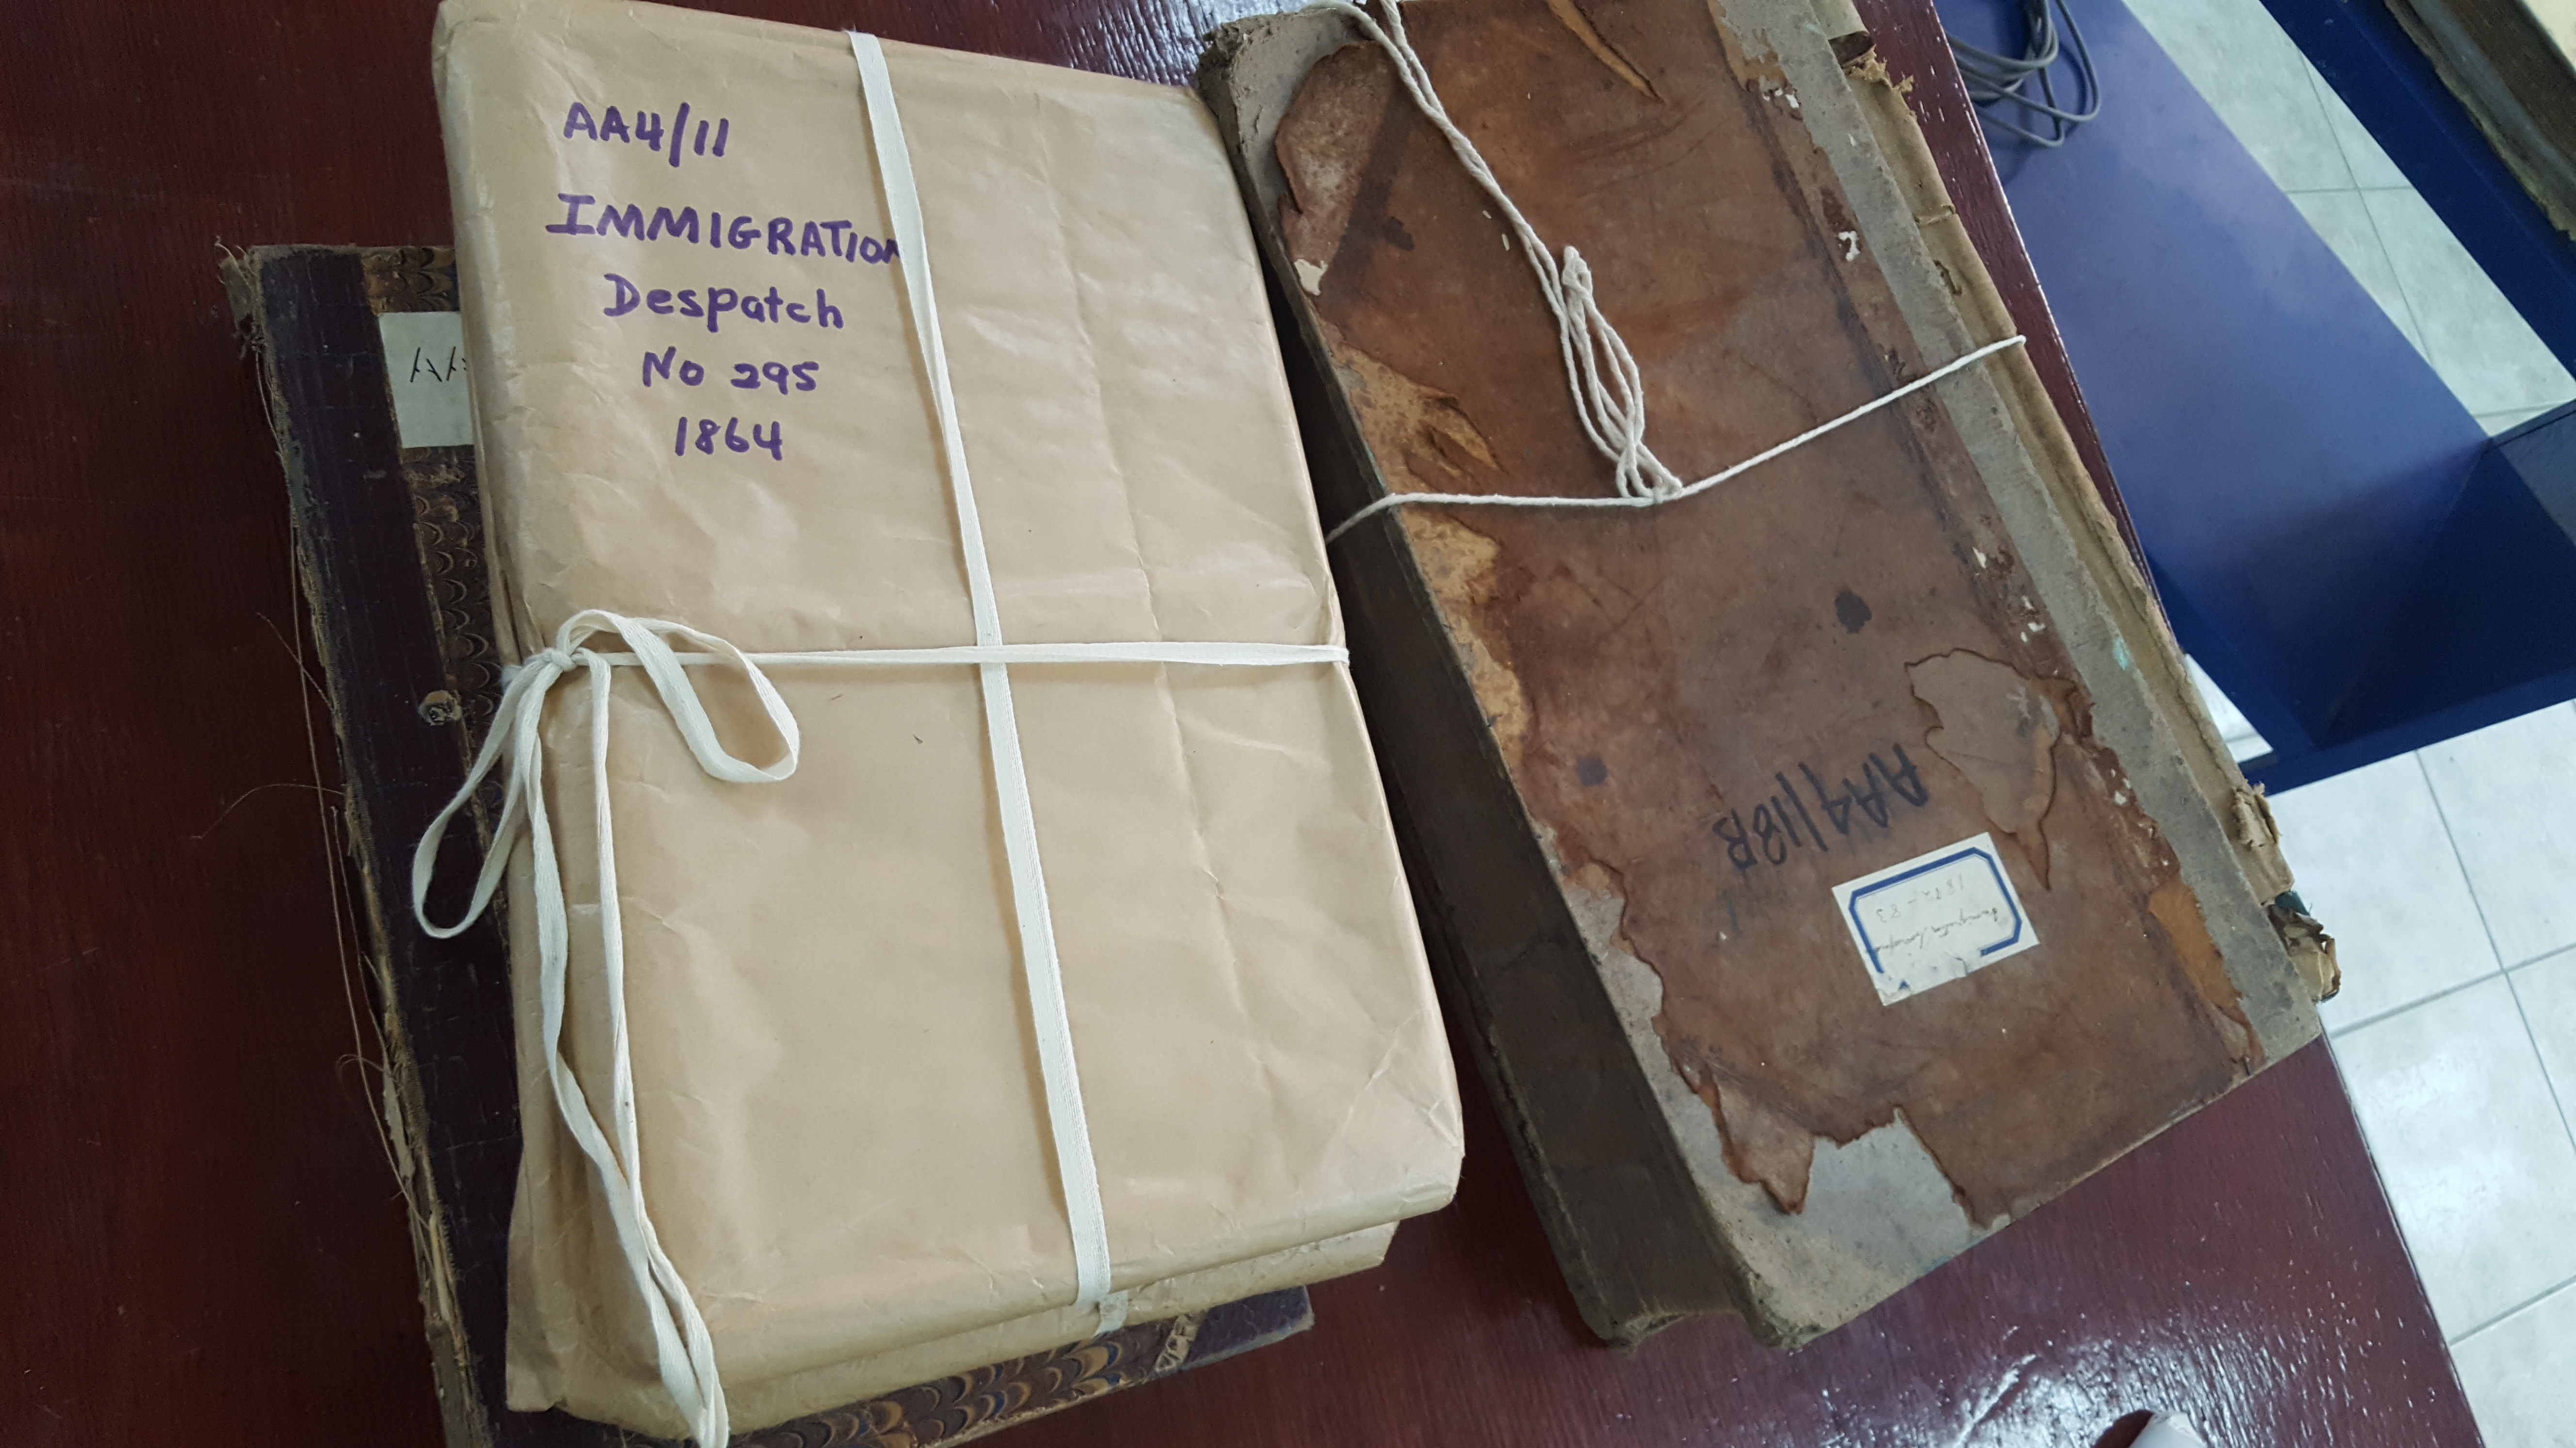 archive-material-at-the-walter-rodney-archives-in-georgetown-image-credit-carinya-sharples.jpg